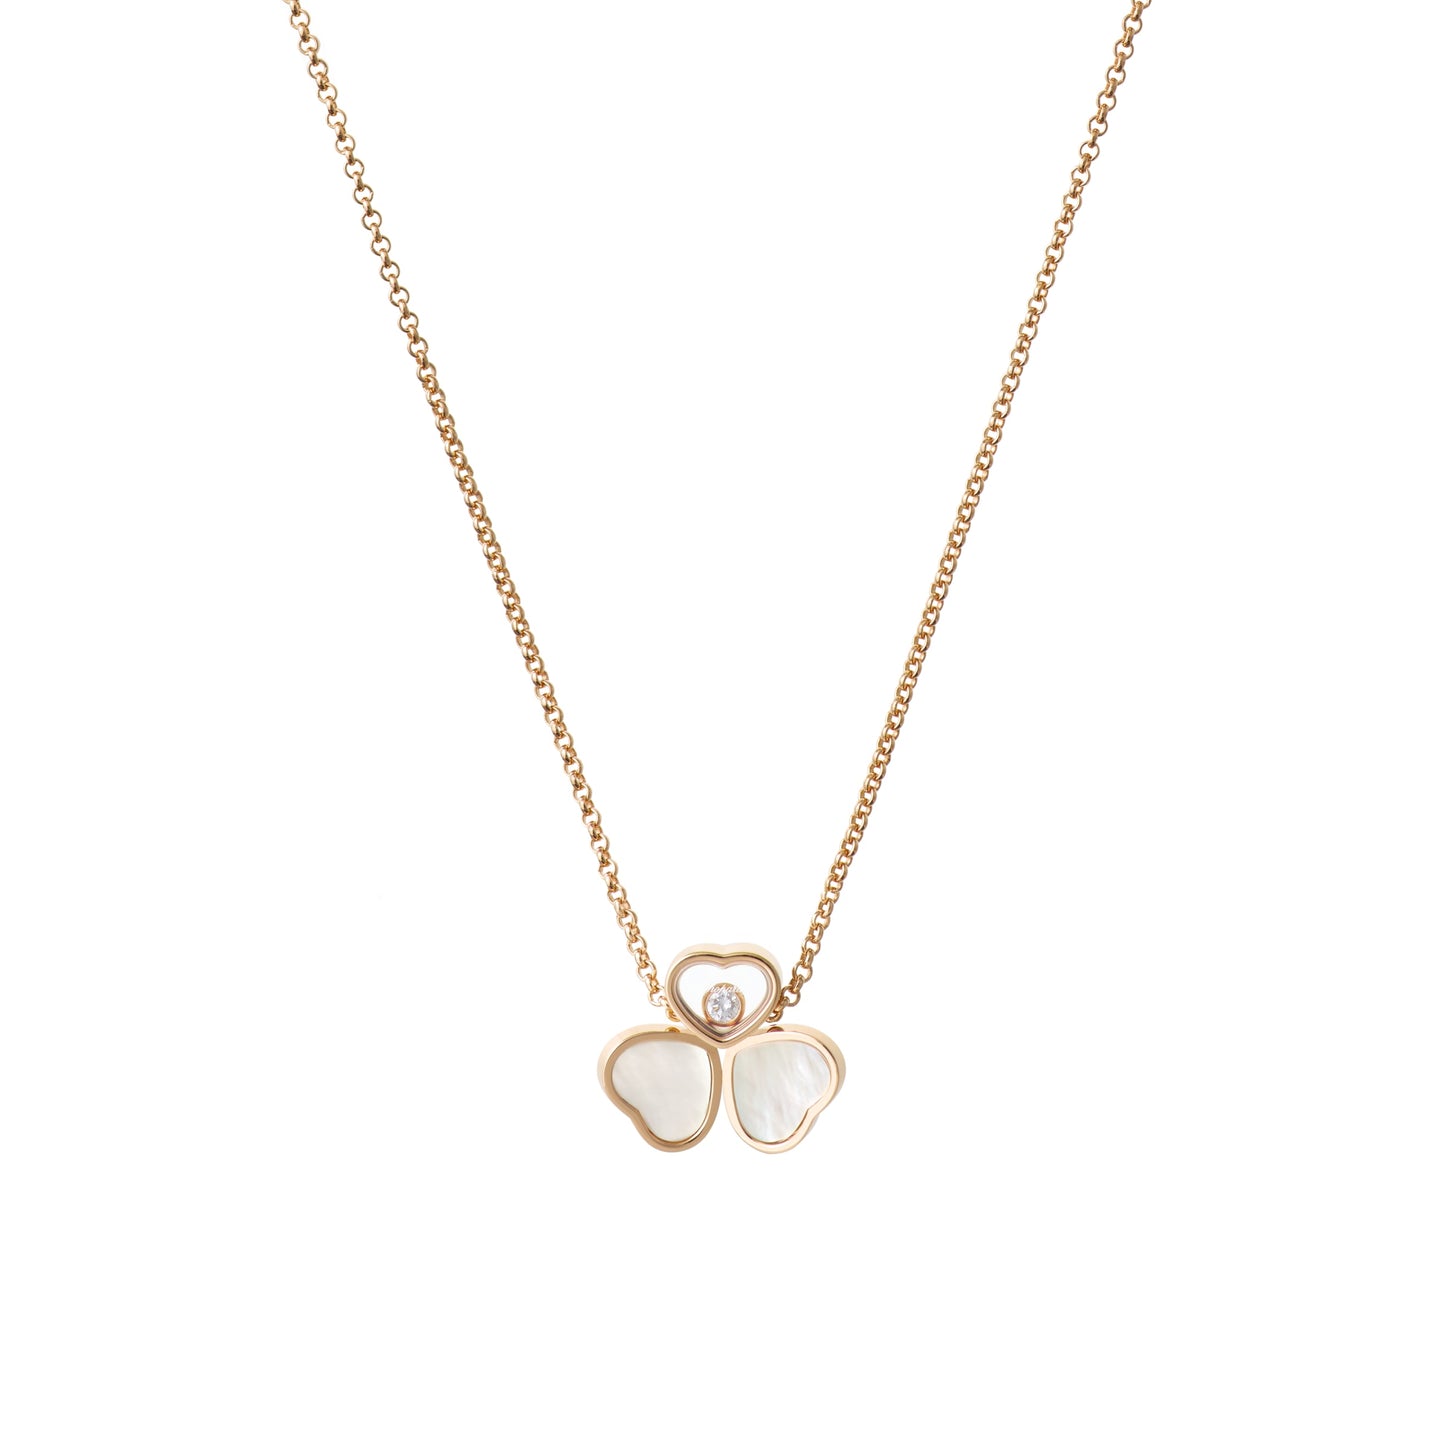 HAPPY HEARTS WINGS NECKLACE, ETHICAL ROSE GOLD, DIAMOND 81A083-5311